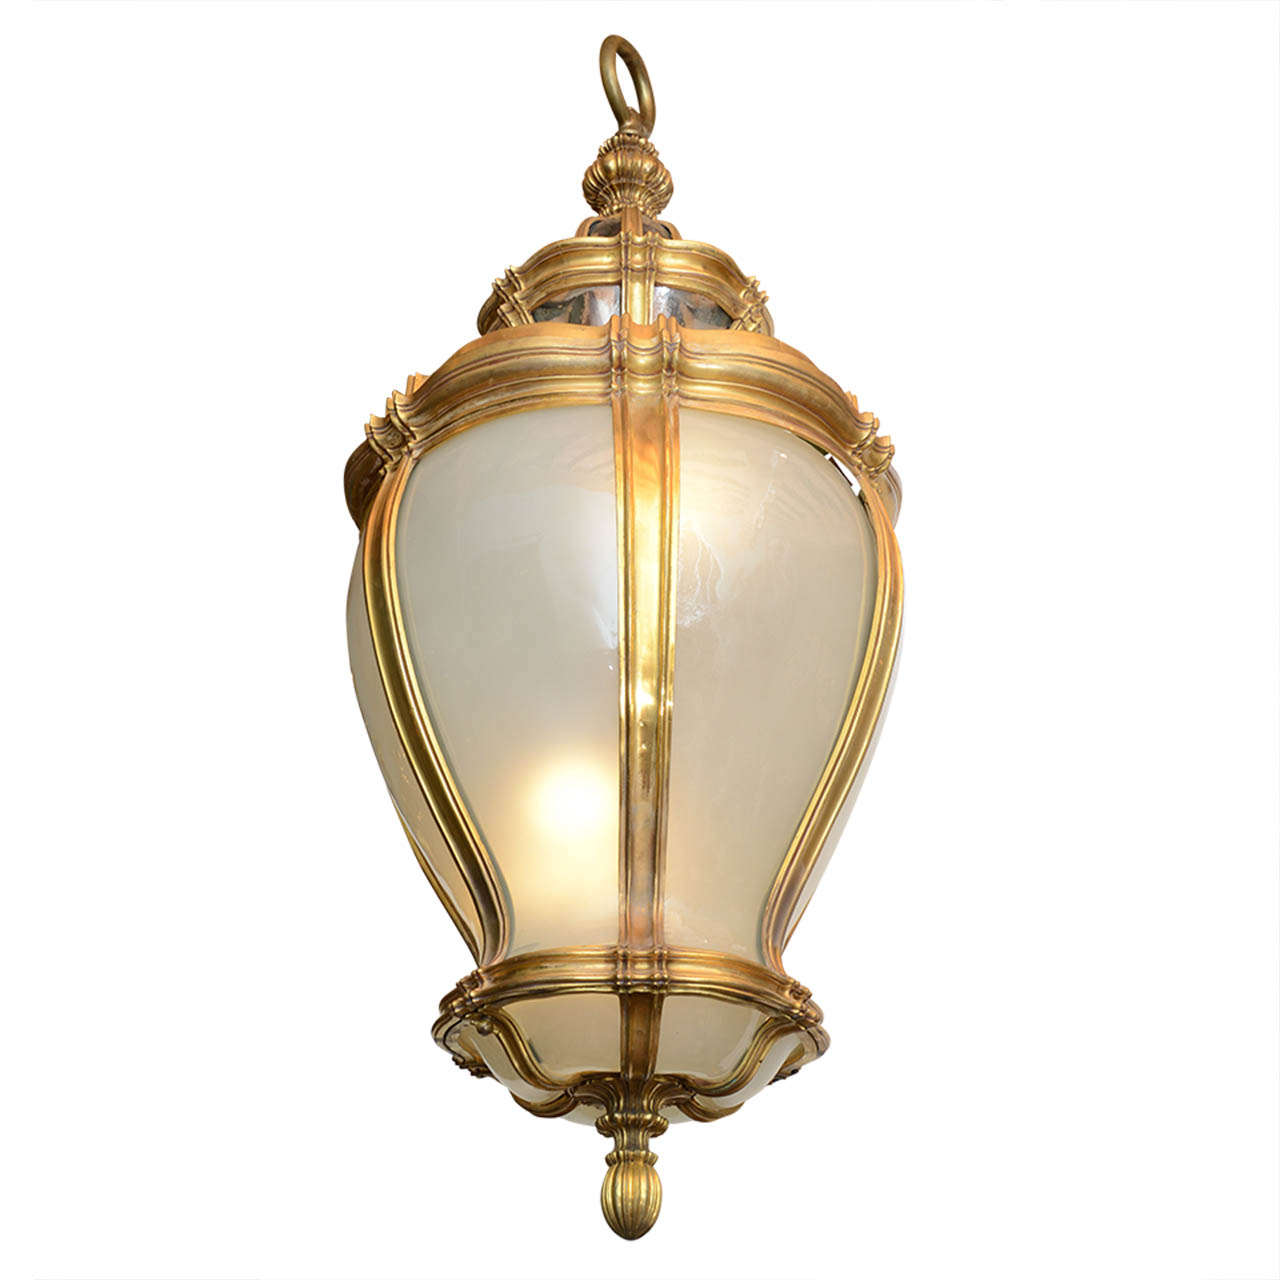 Exquisite and Massive Gilt Bronze and Frosted Glass Lantern by E. F. Caldwell